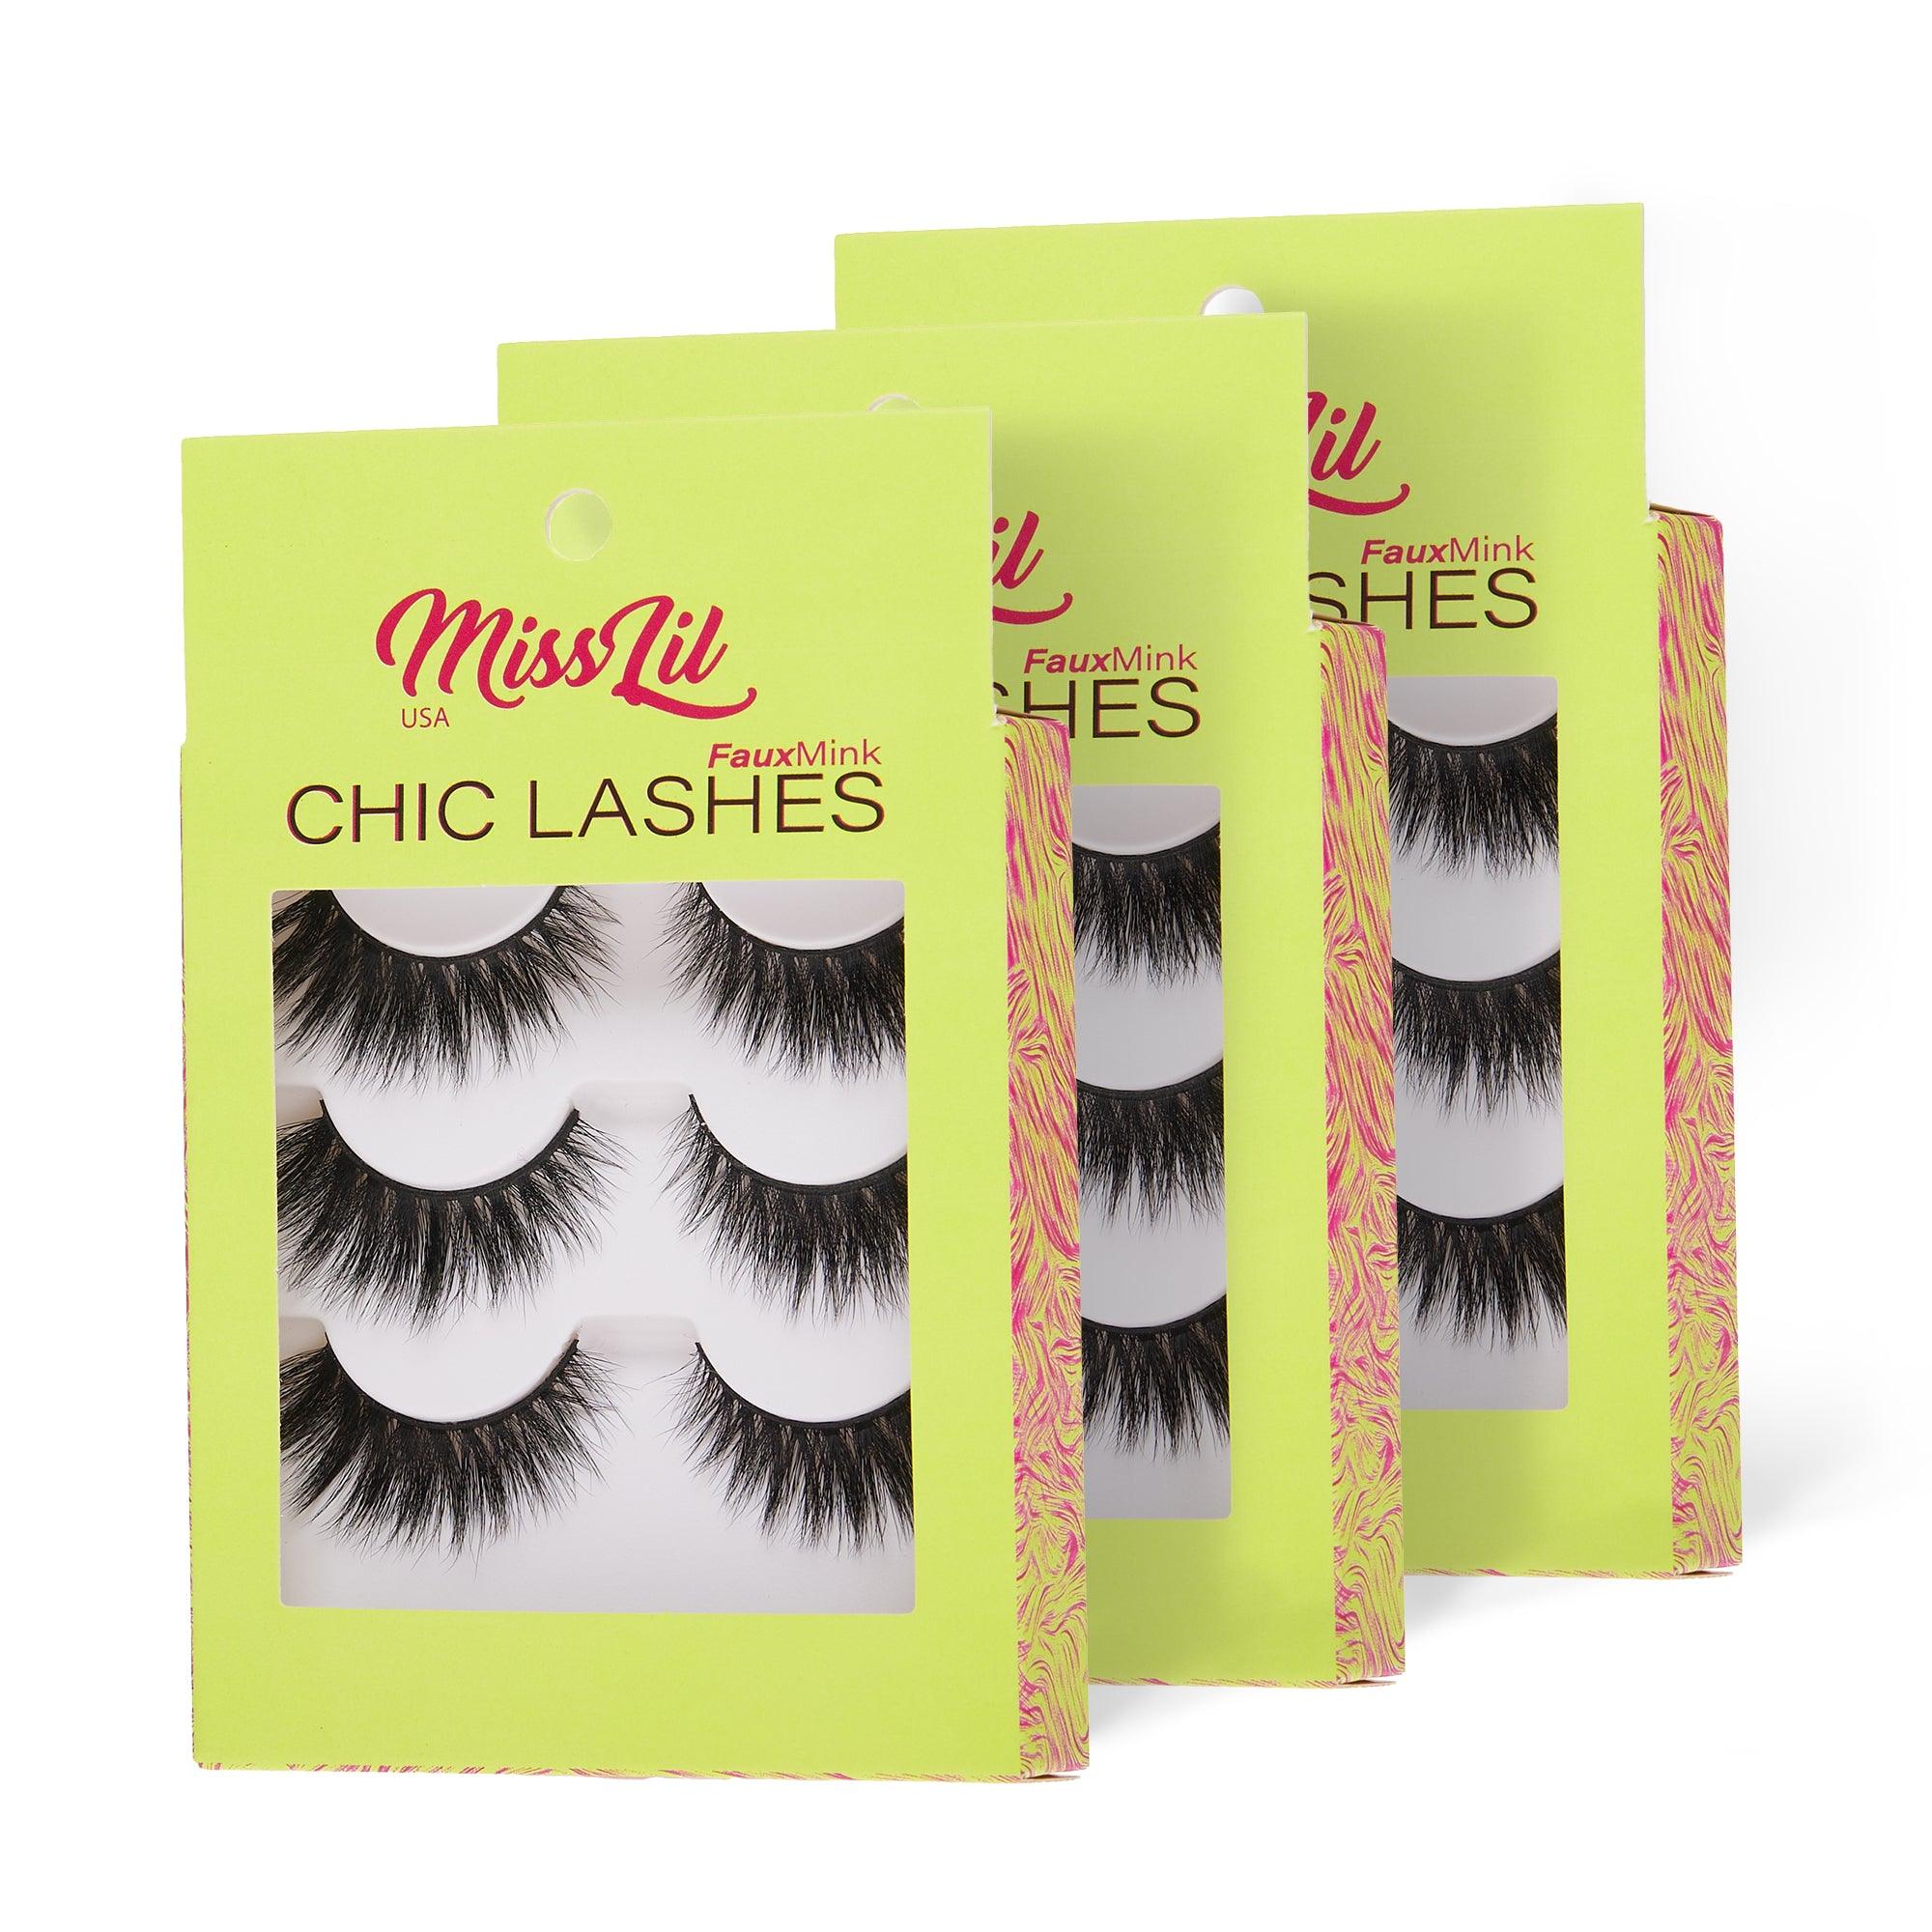 3-Pair Faux Mink Eyelashes - Chic Lashes Collection #16 - Pack of 3 - Miss Lil USA